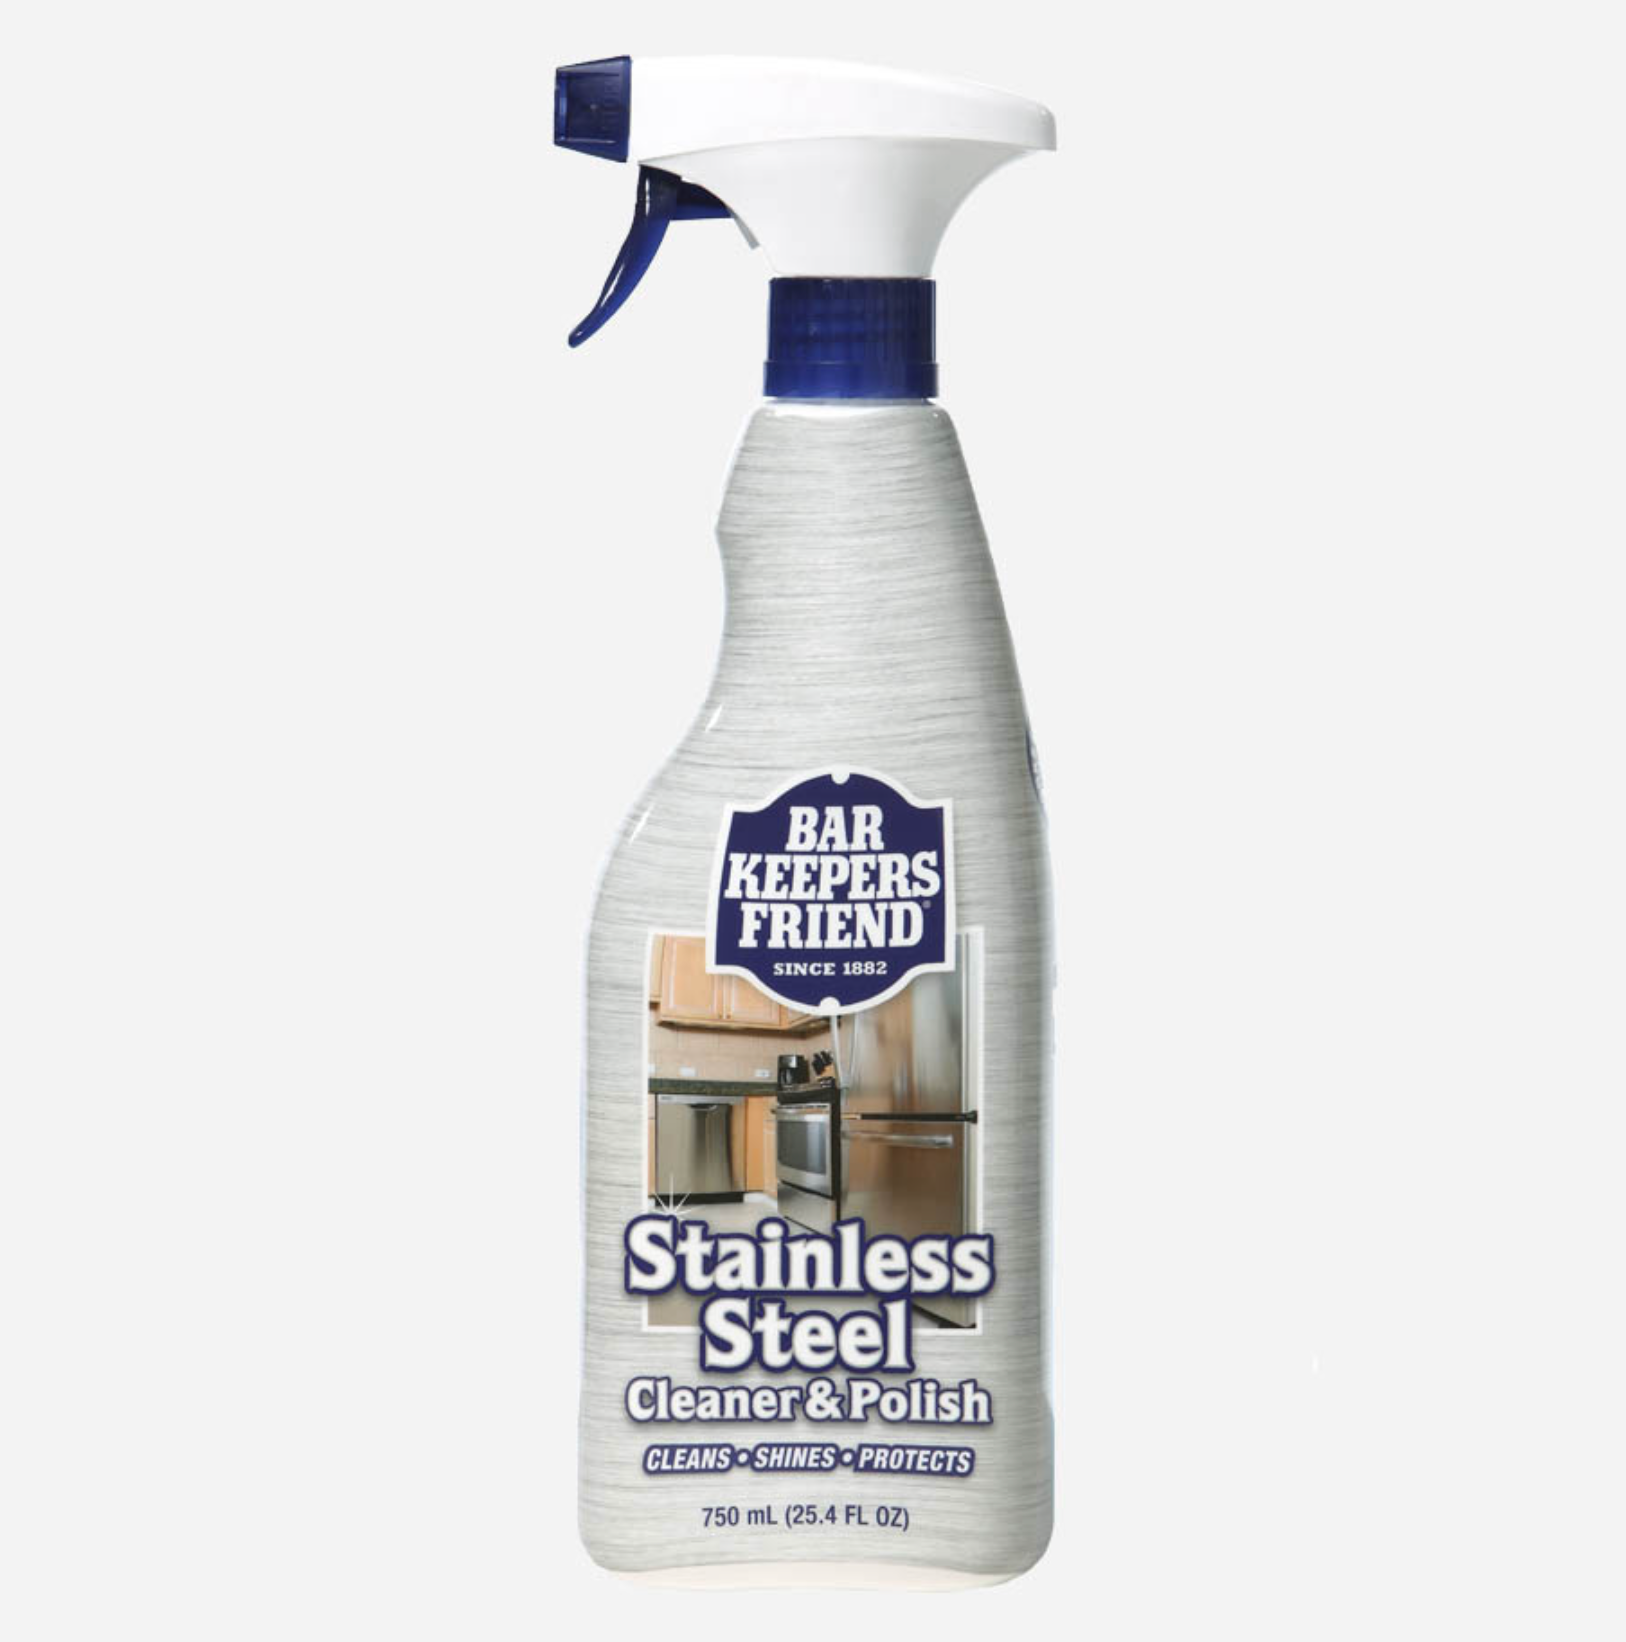 Bar Keepers Friend Stainless Steel Cleaner